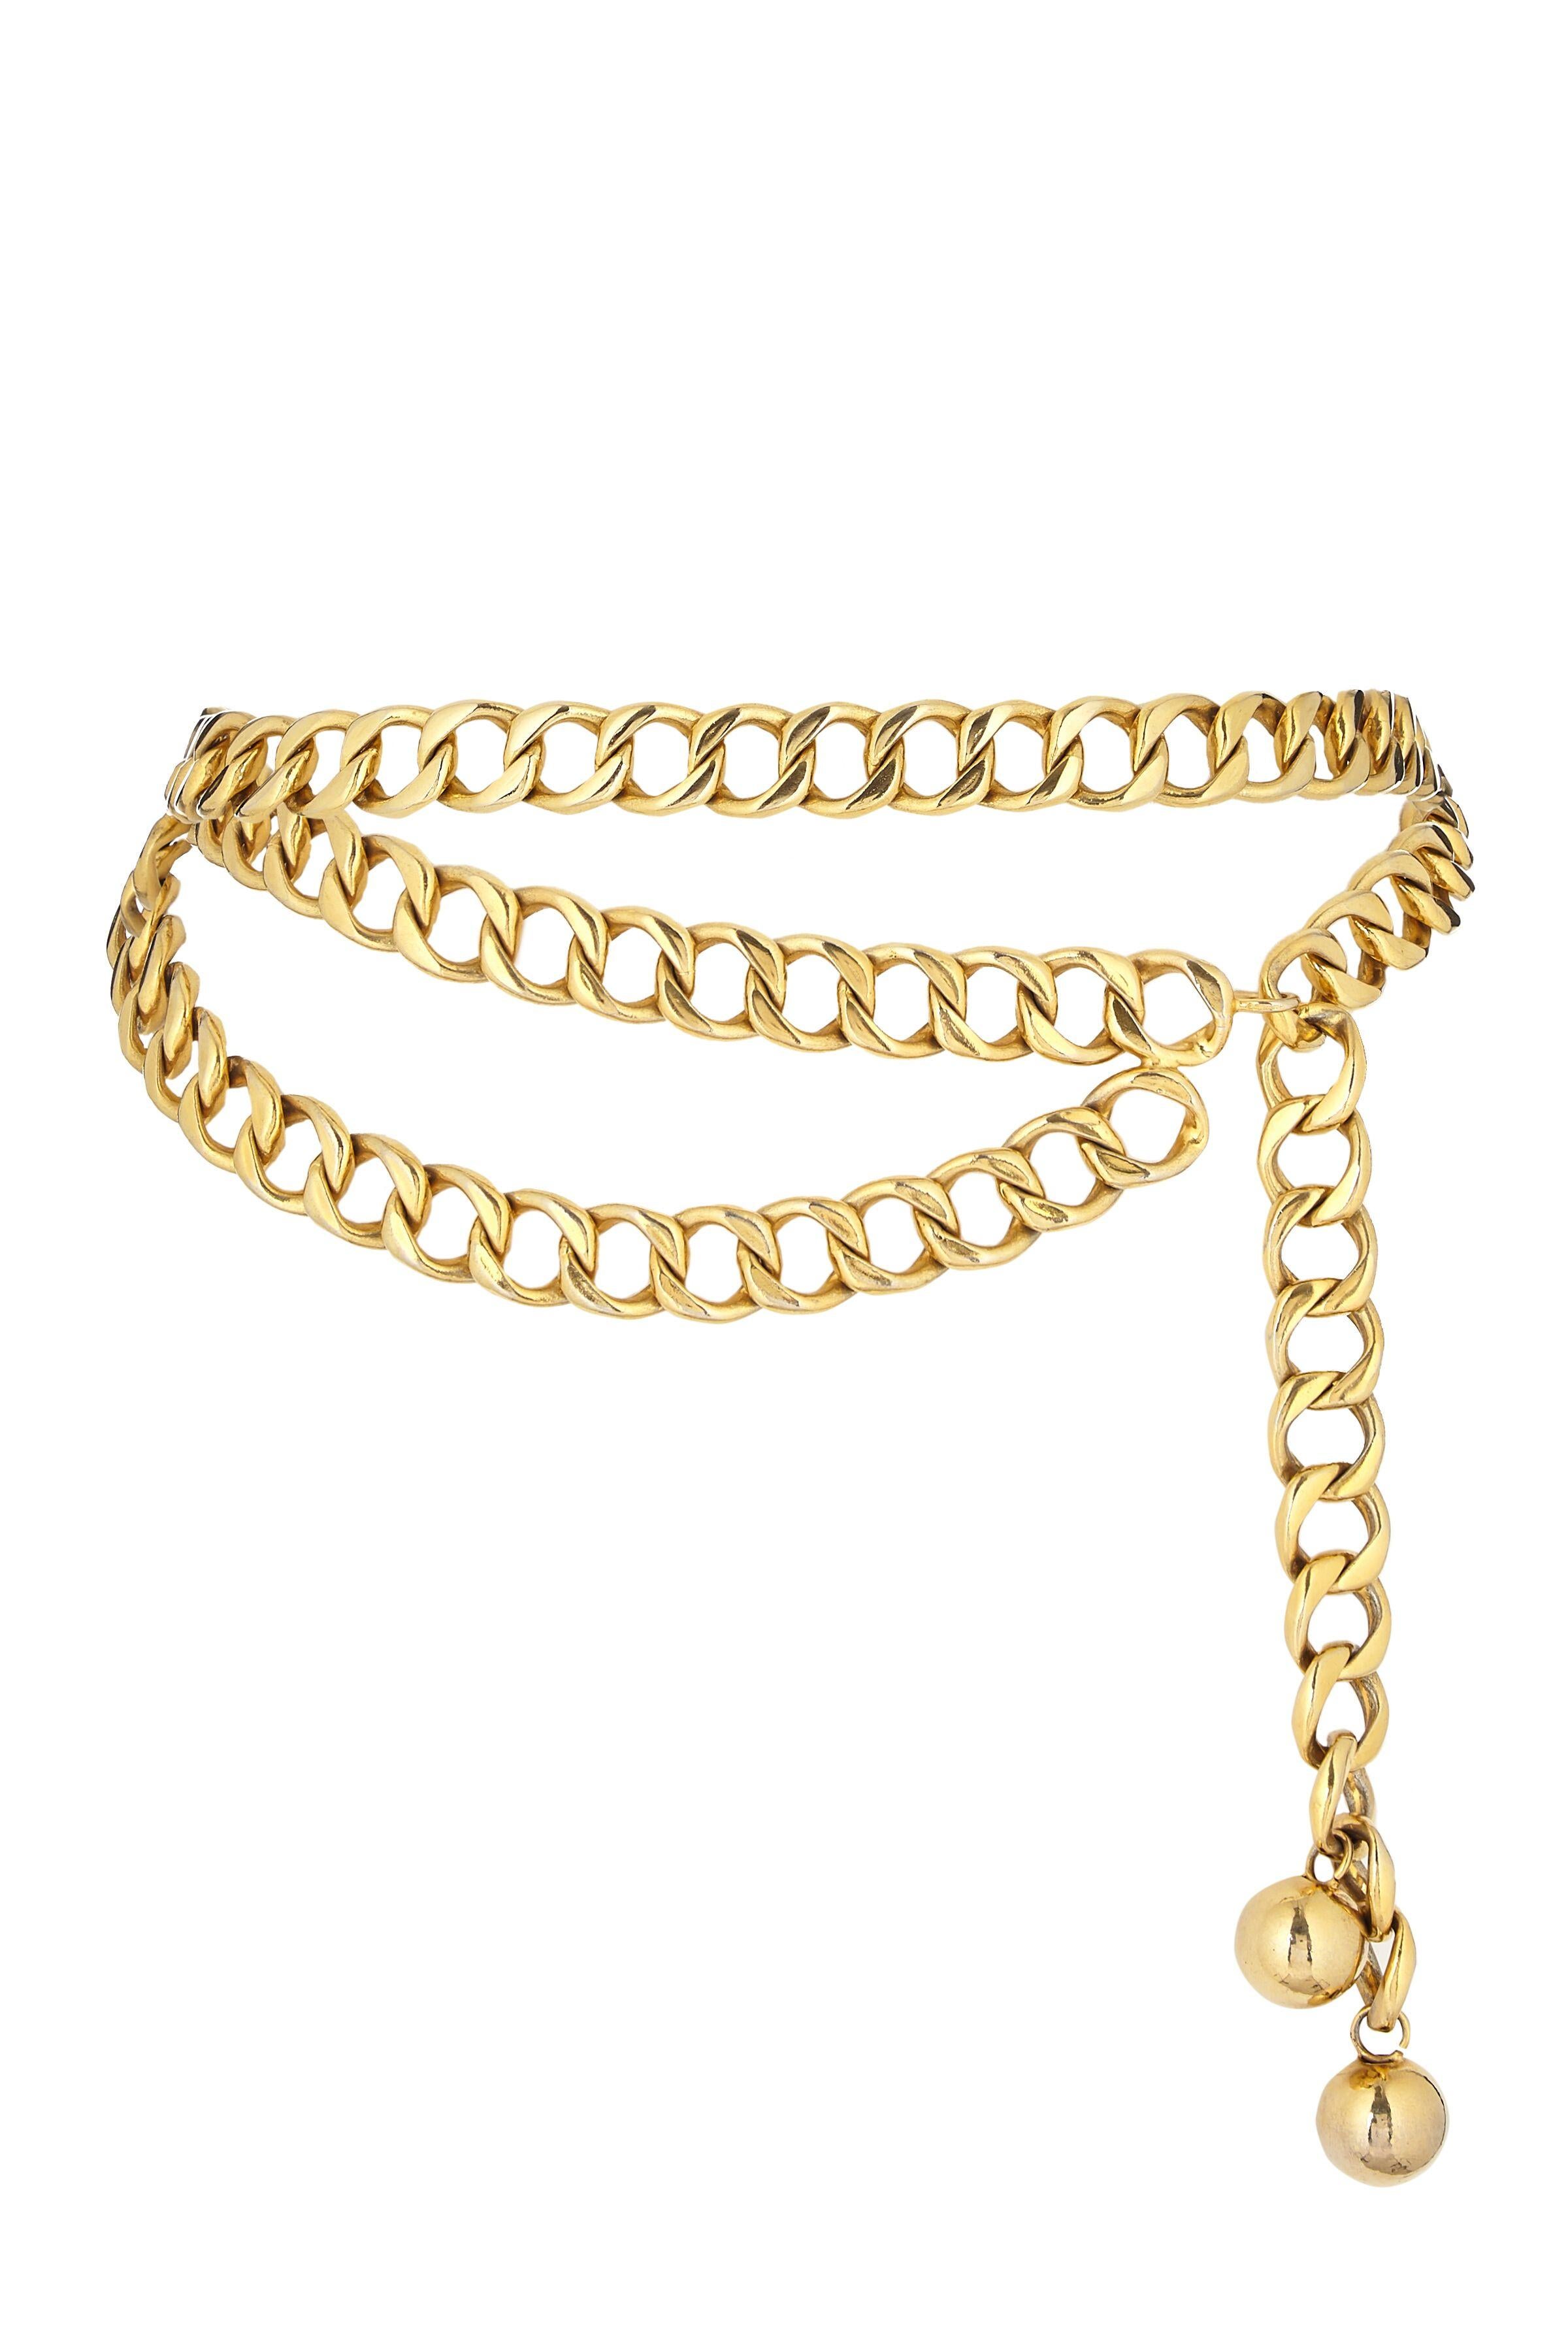 Chanel 1980s Heavy Gold Tone Chain Belt With Bauble Charms In Excellent Condition In London, GB